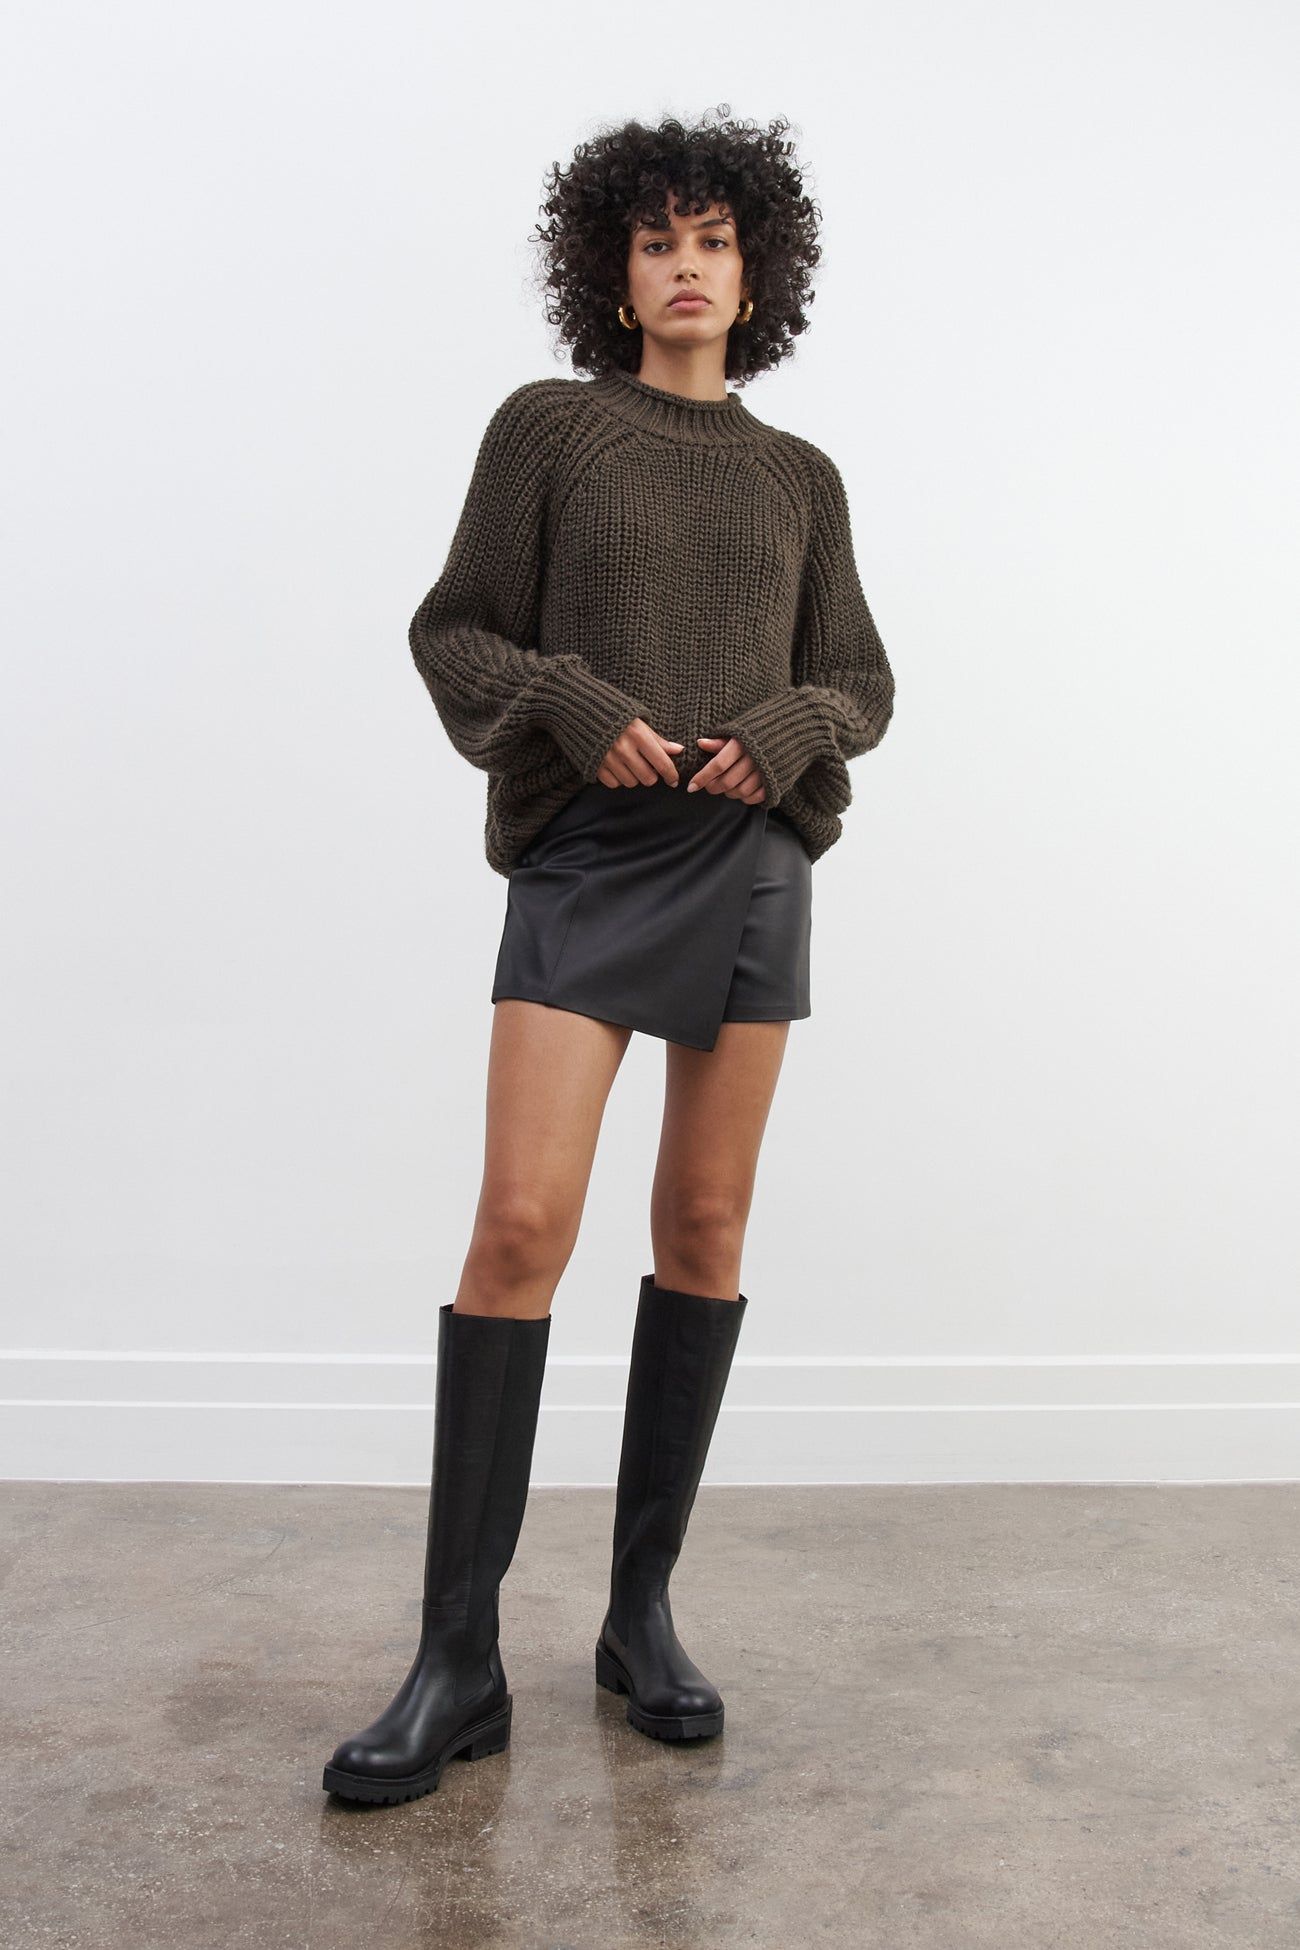 Black knee high boots: Rock this
Fall/winter trend